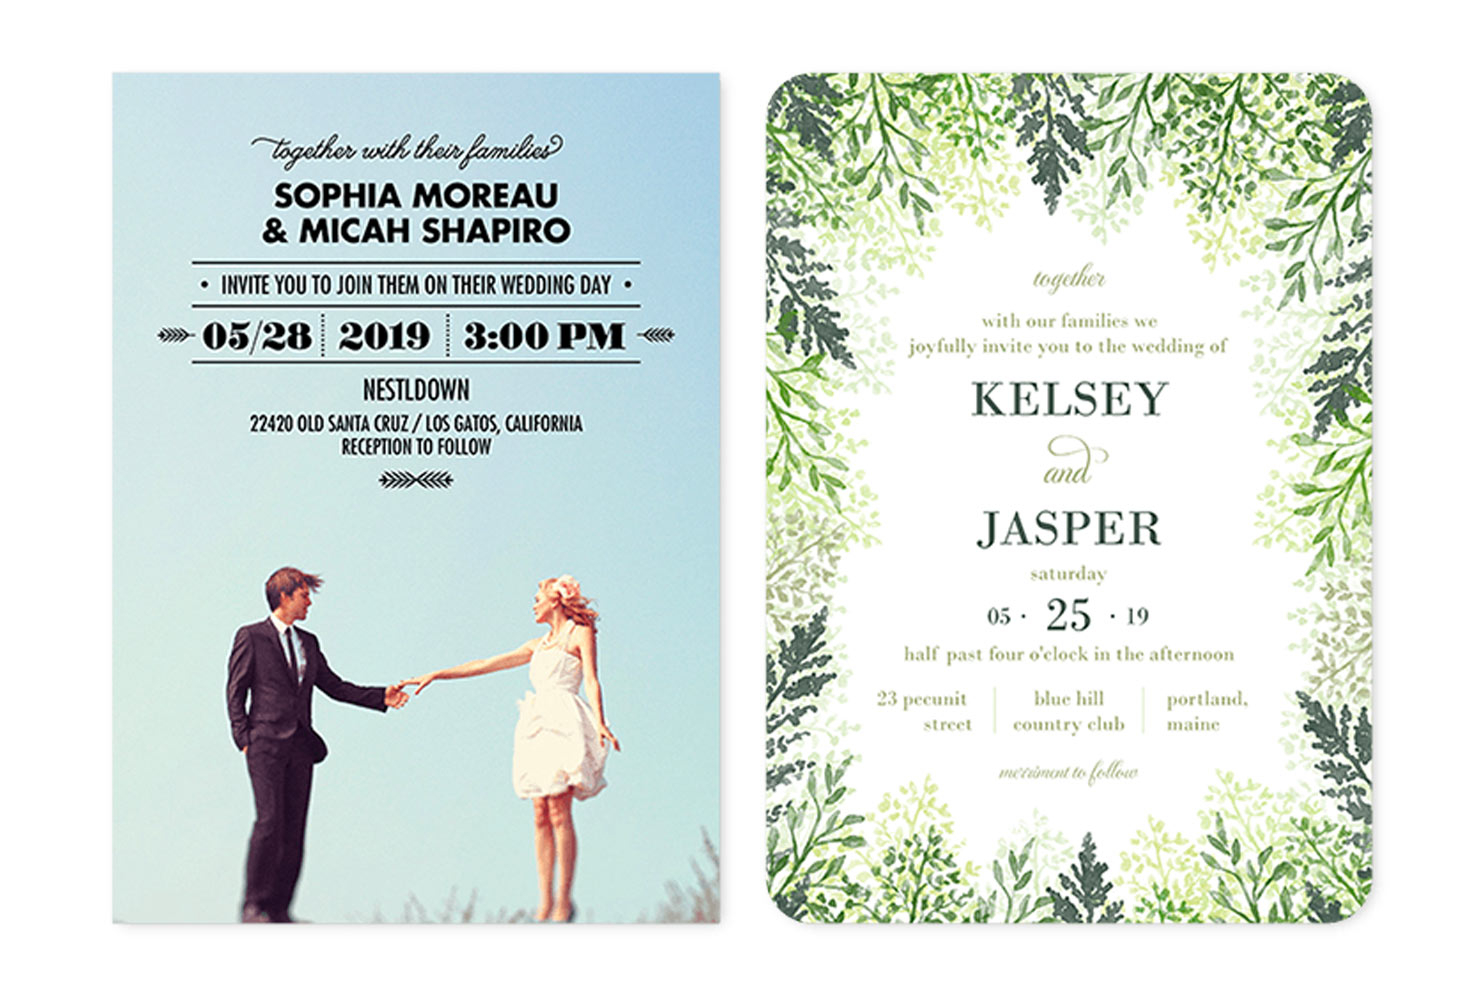 35 Wedding Invitation Wording Examples 2019 Shutterfly intended for sizing 1480 X 1000